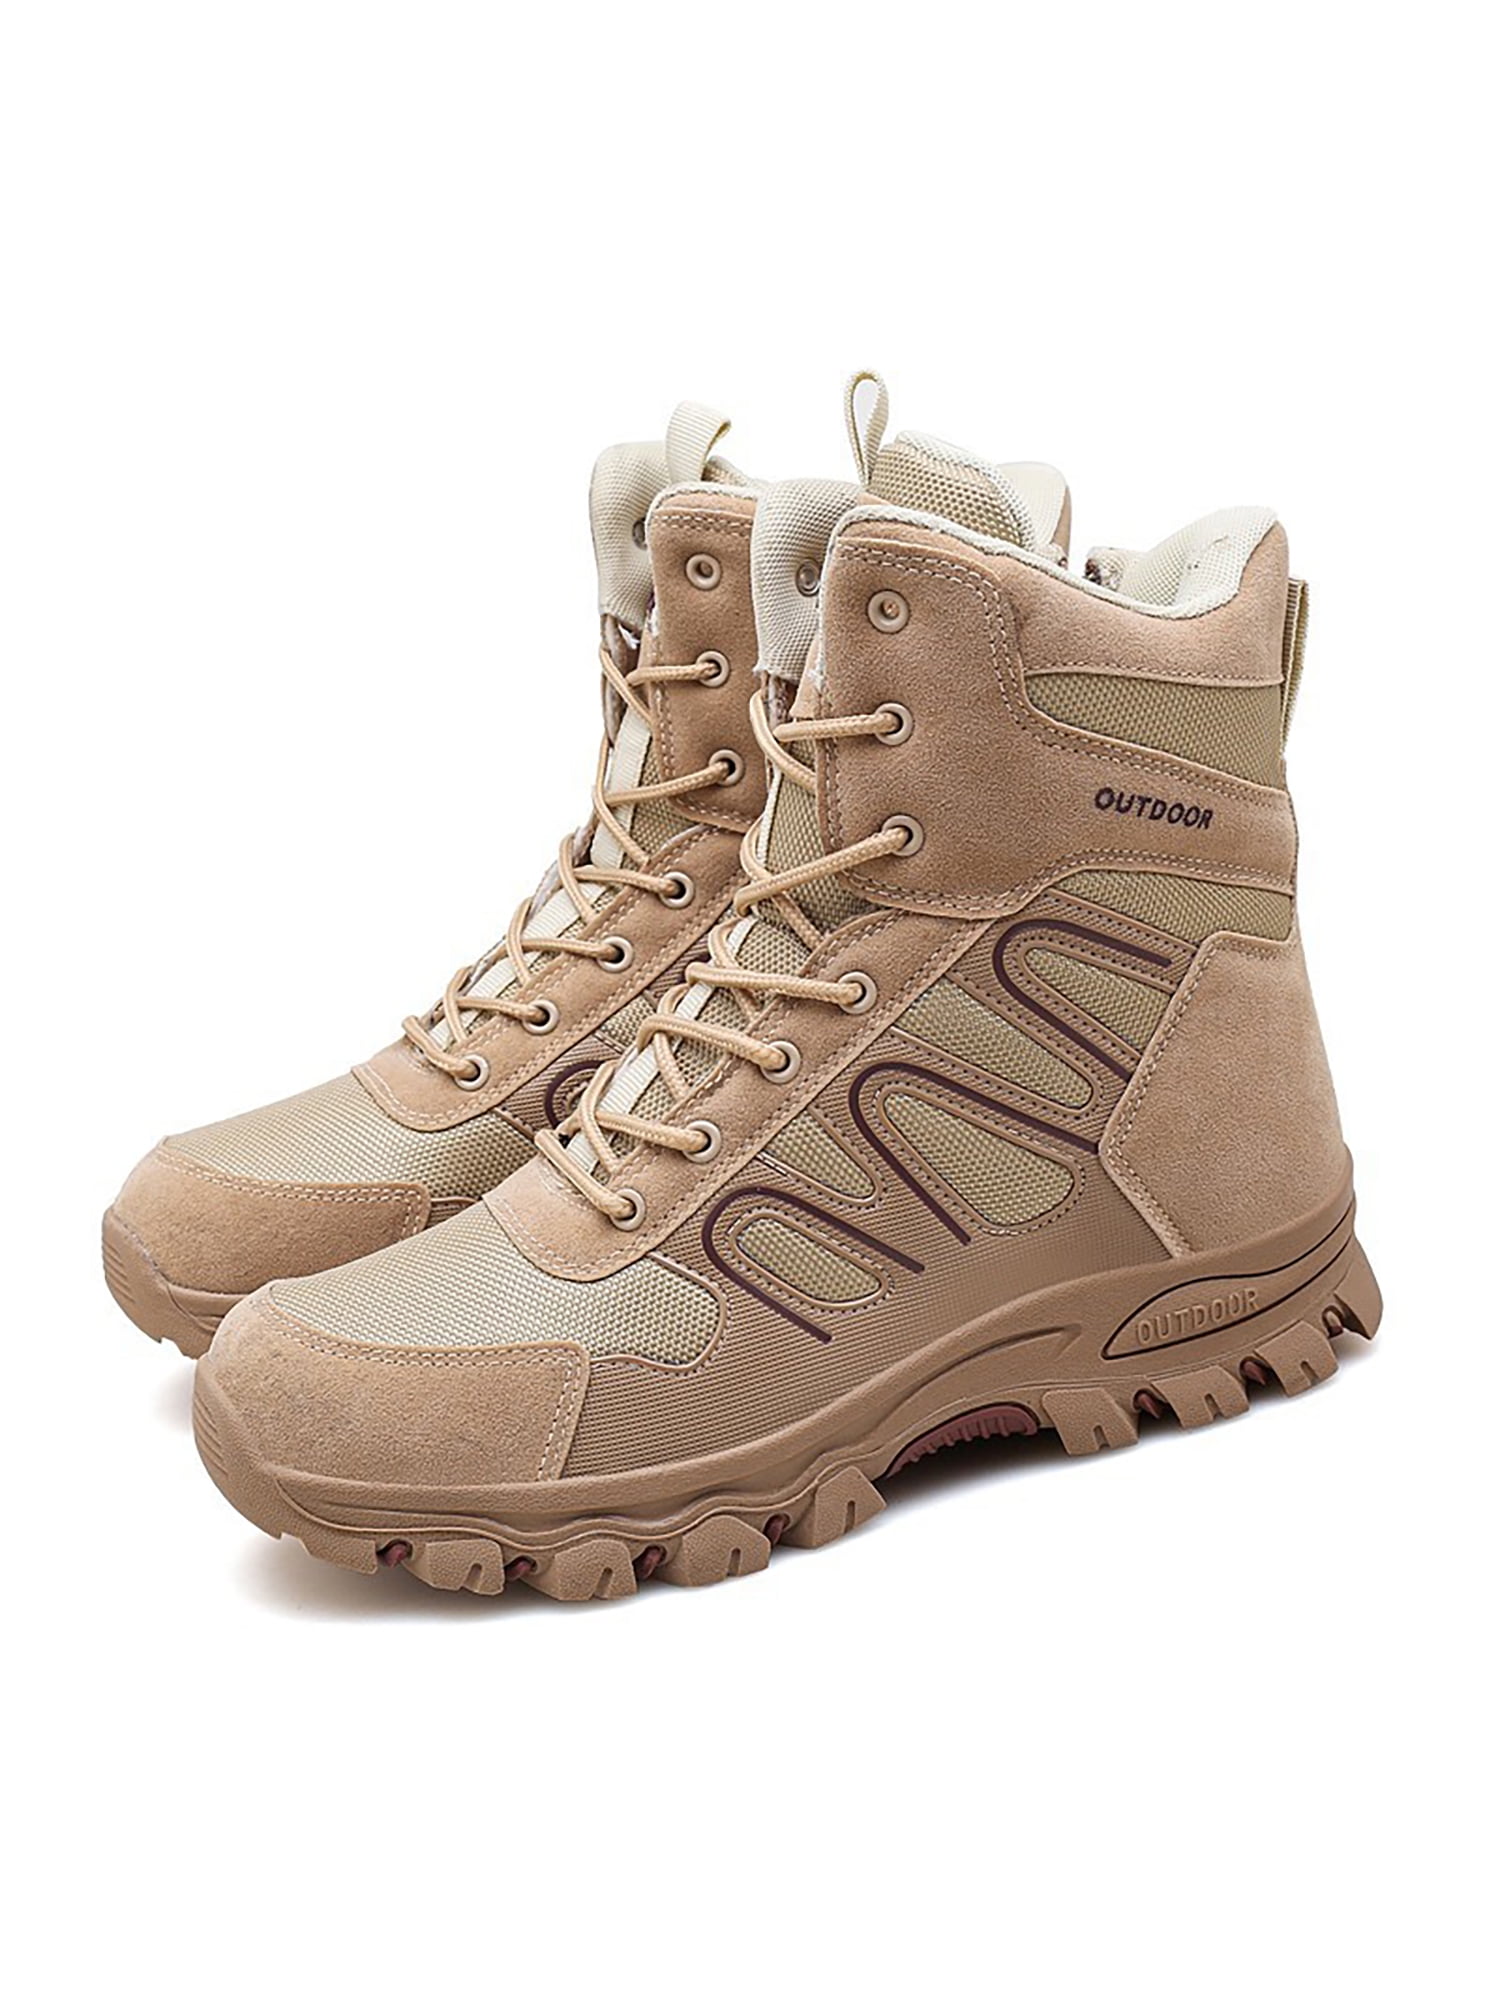 Mens Womens Army Tactical Boots Work Military Patrol Desert Combat Hiking Shoes 